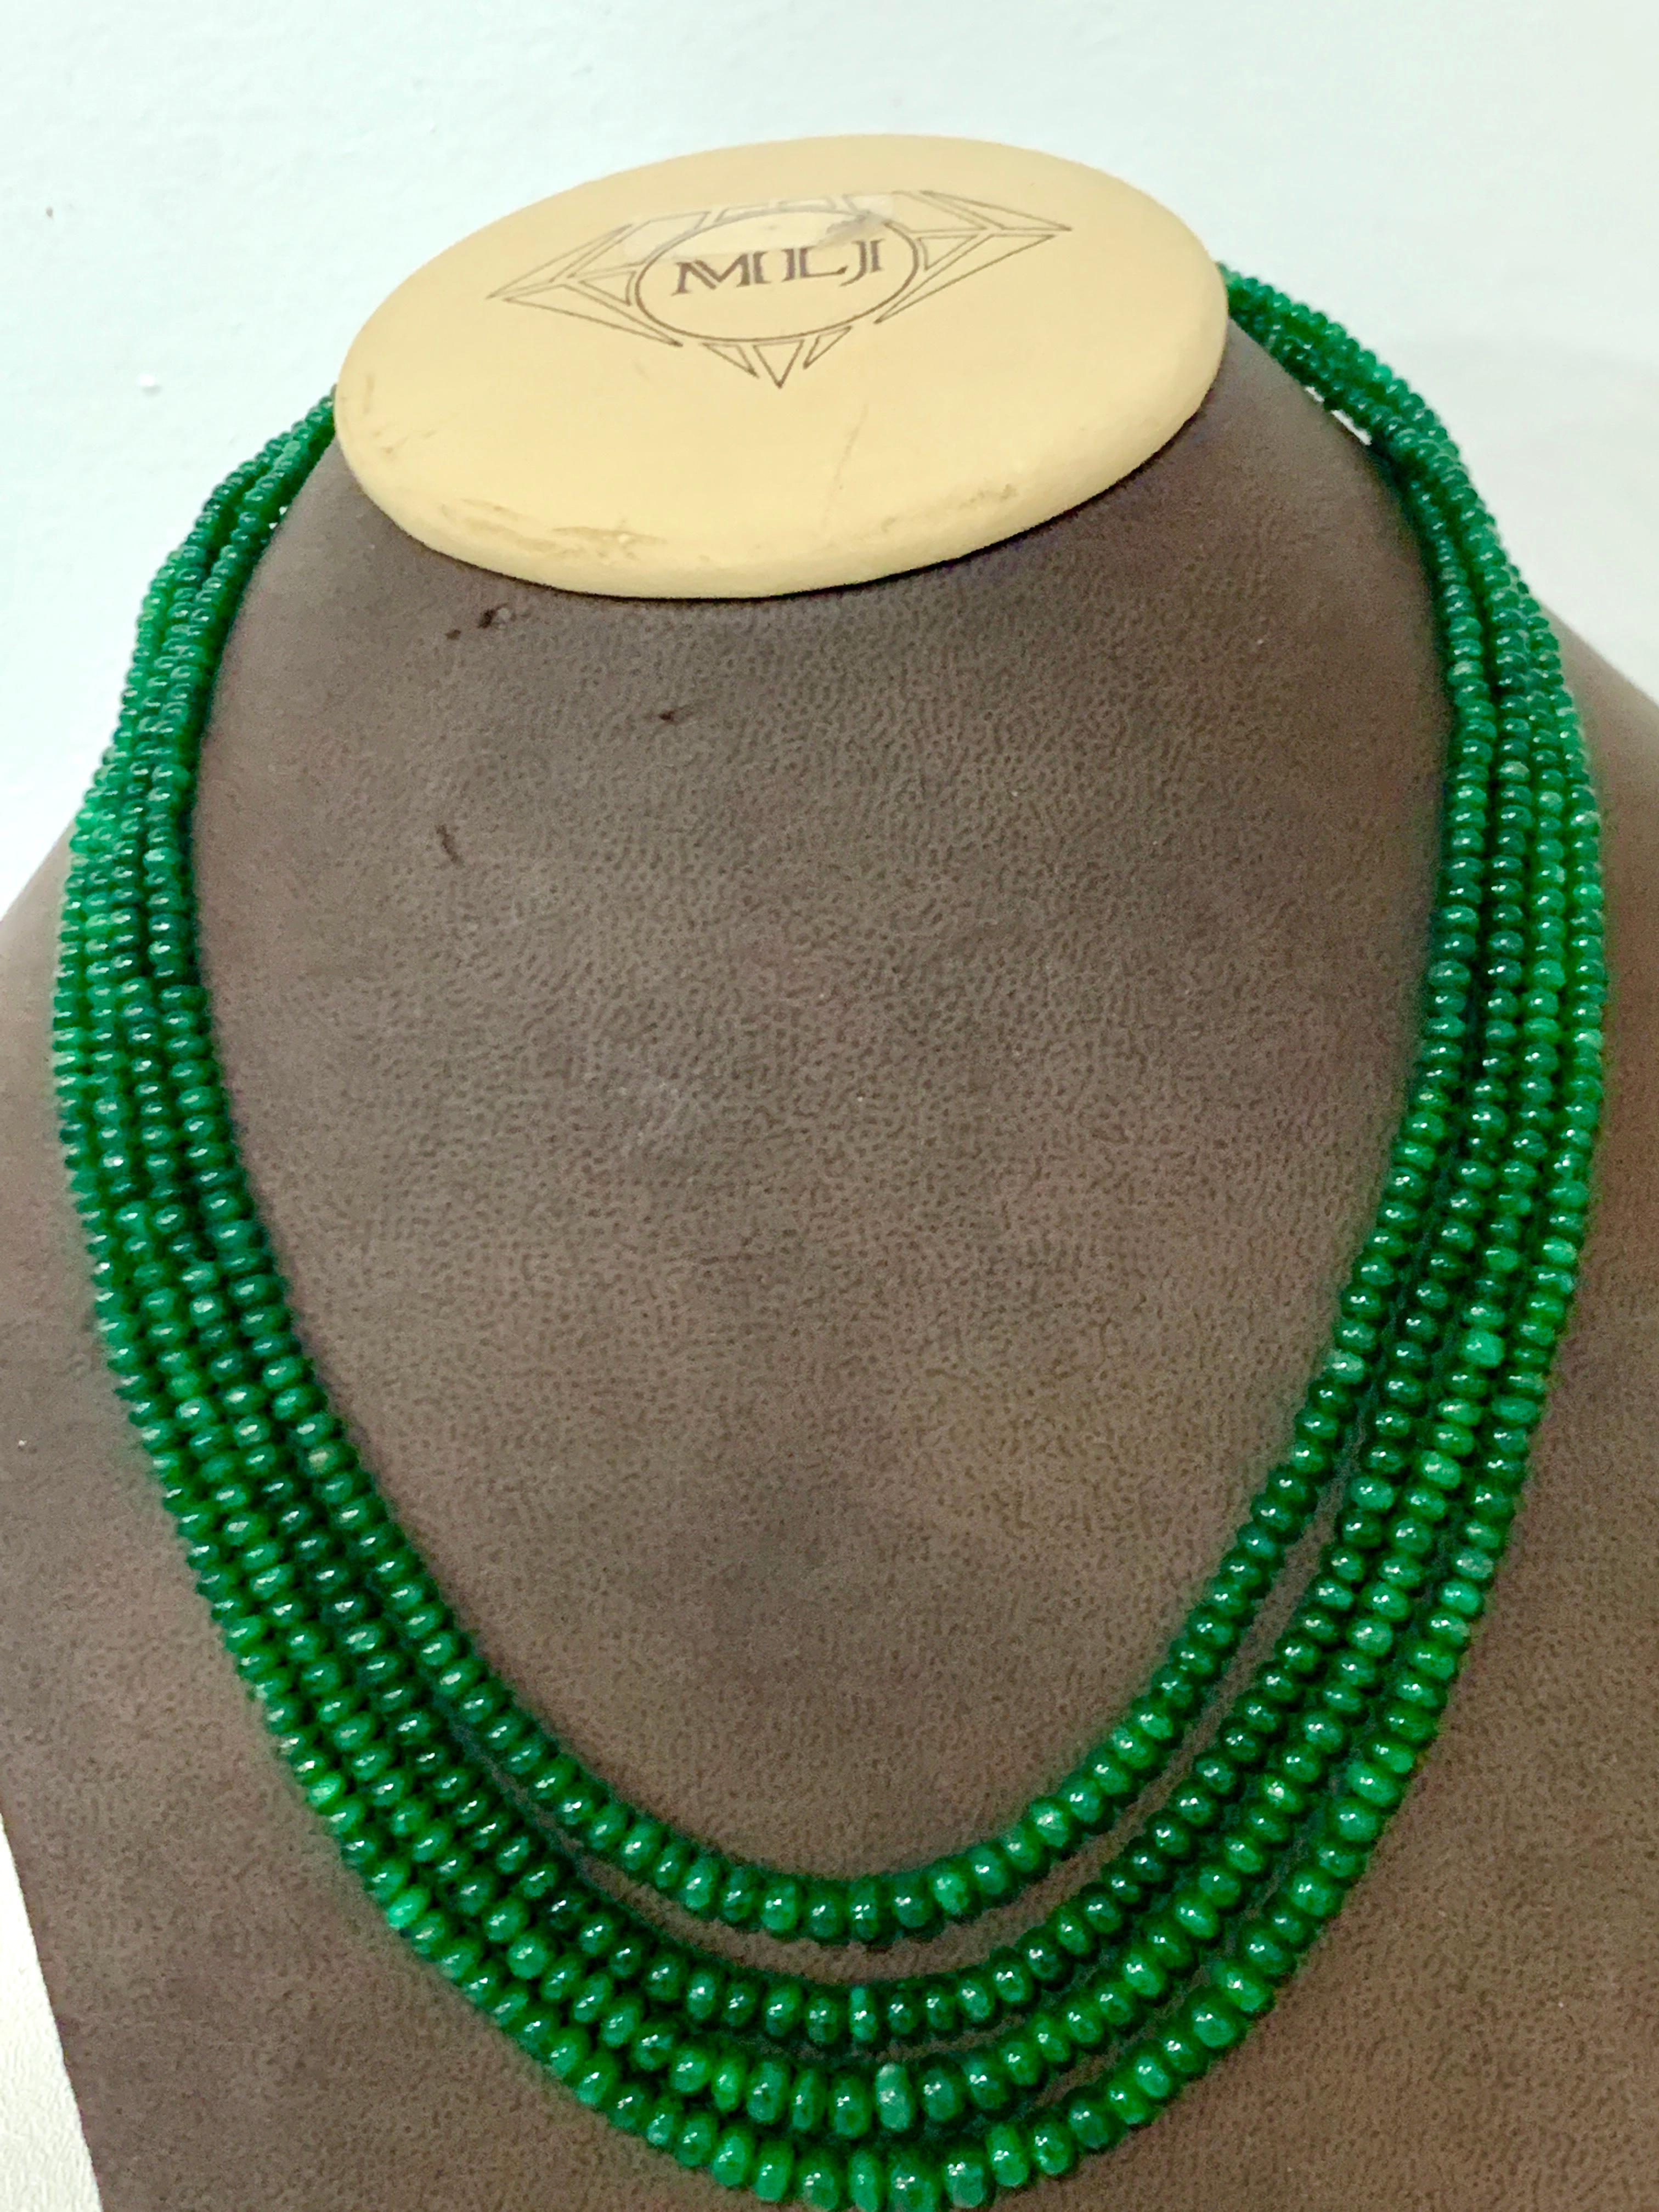 Round Cut 205 Carat 4 Layer Brazilian Emerald Bead Necklace Sterling Silver Clasp